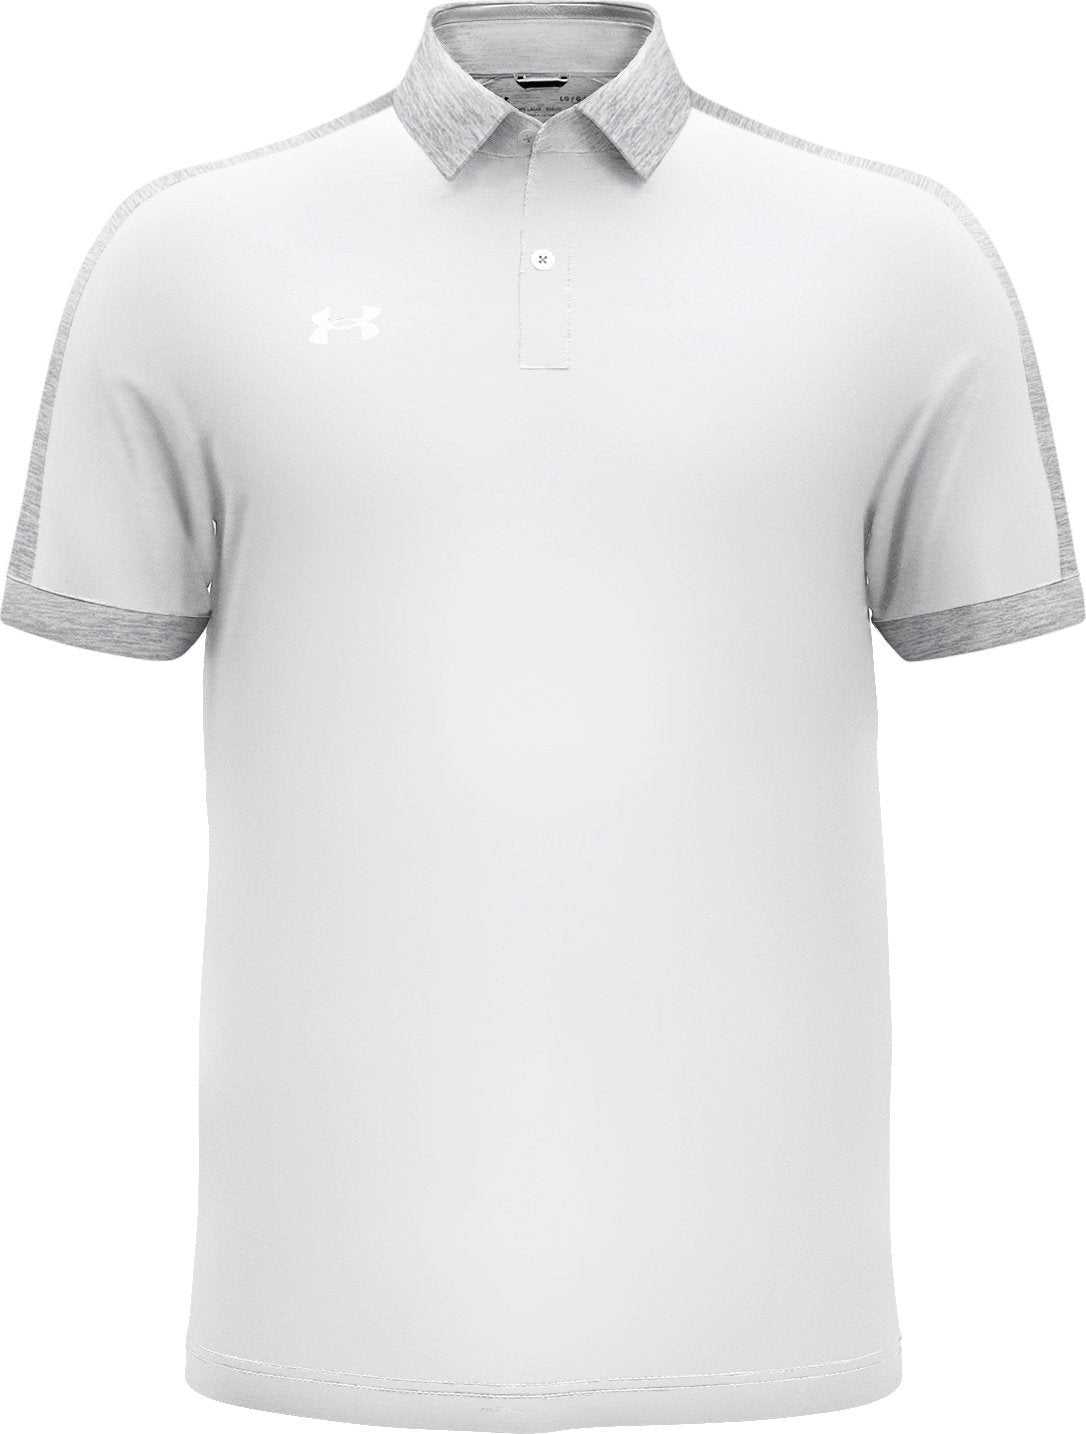 Under Armour 1376907 Mens Trophy Level Polo - White Mod-Gray